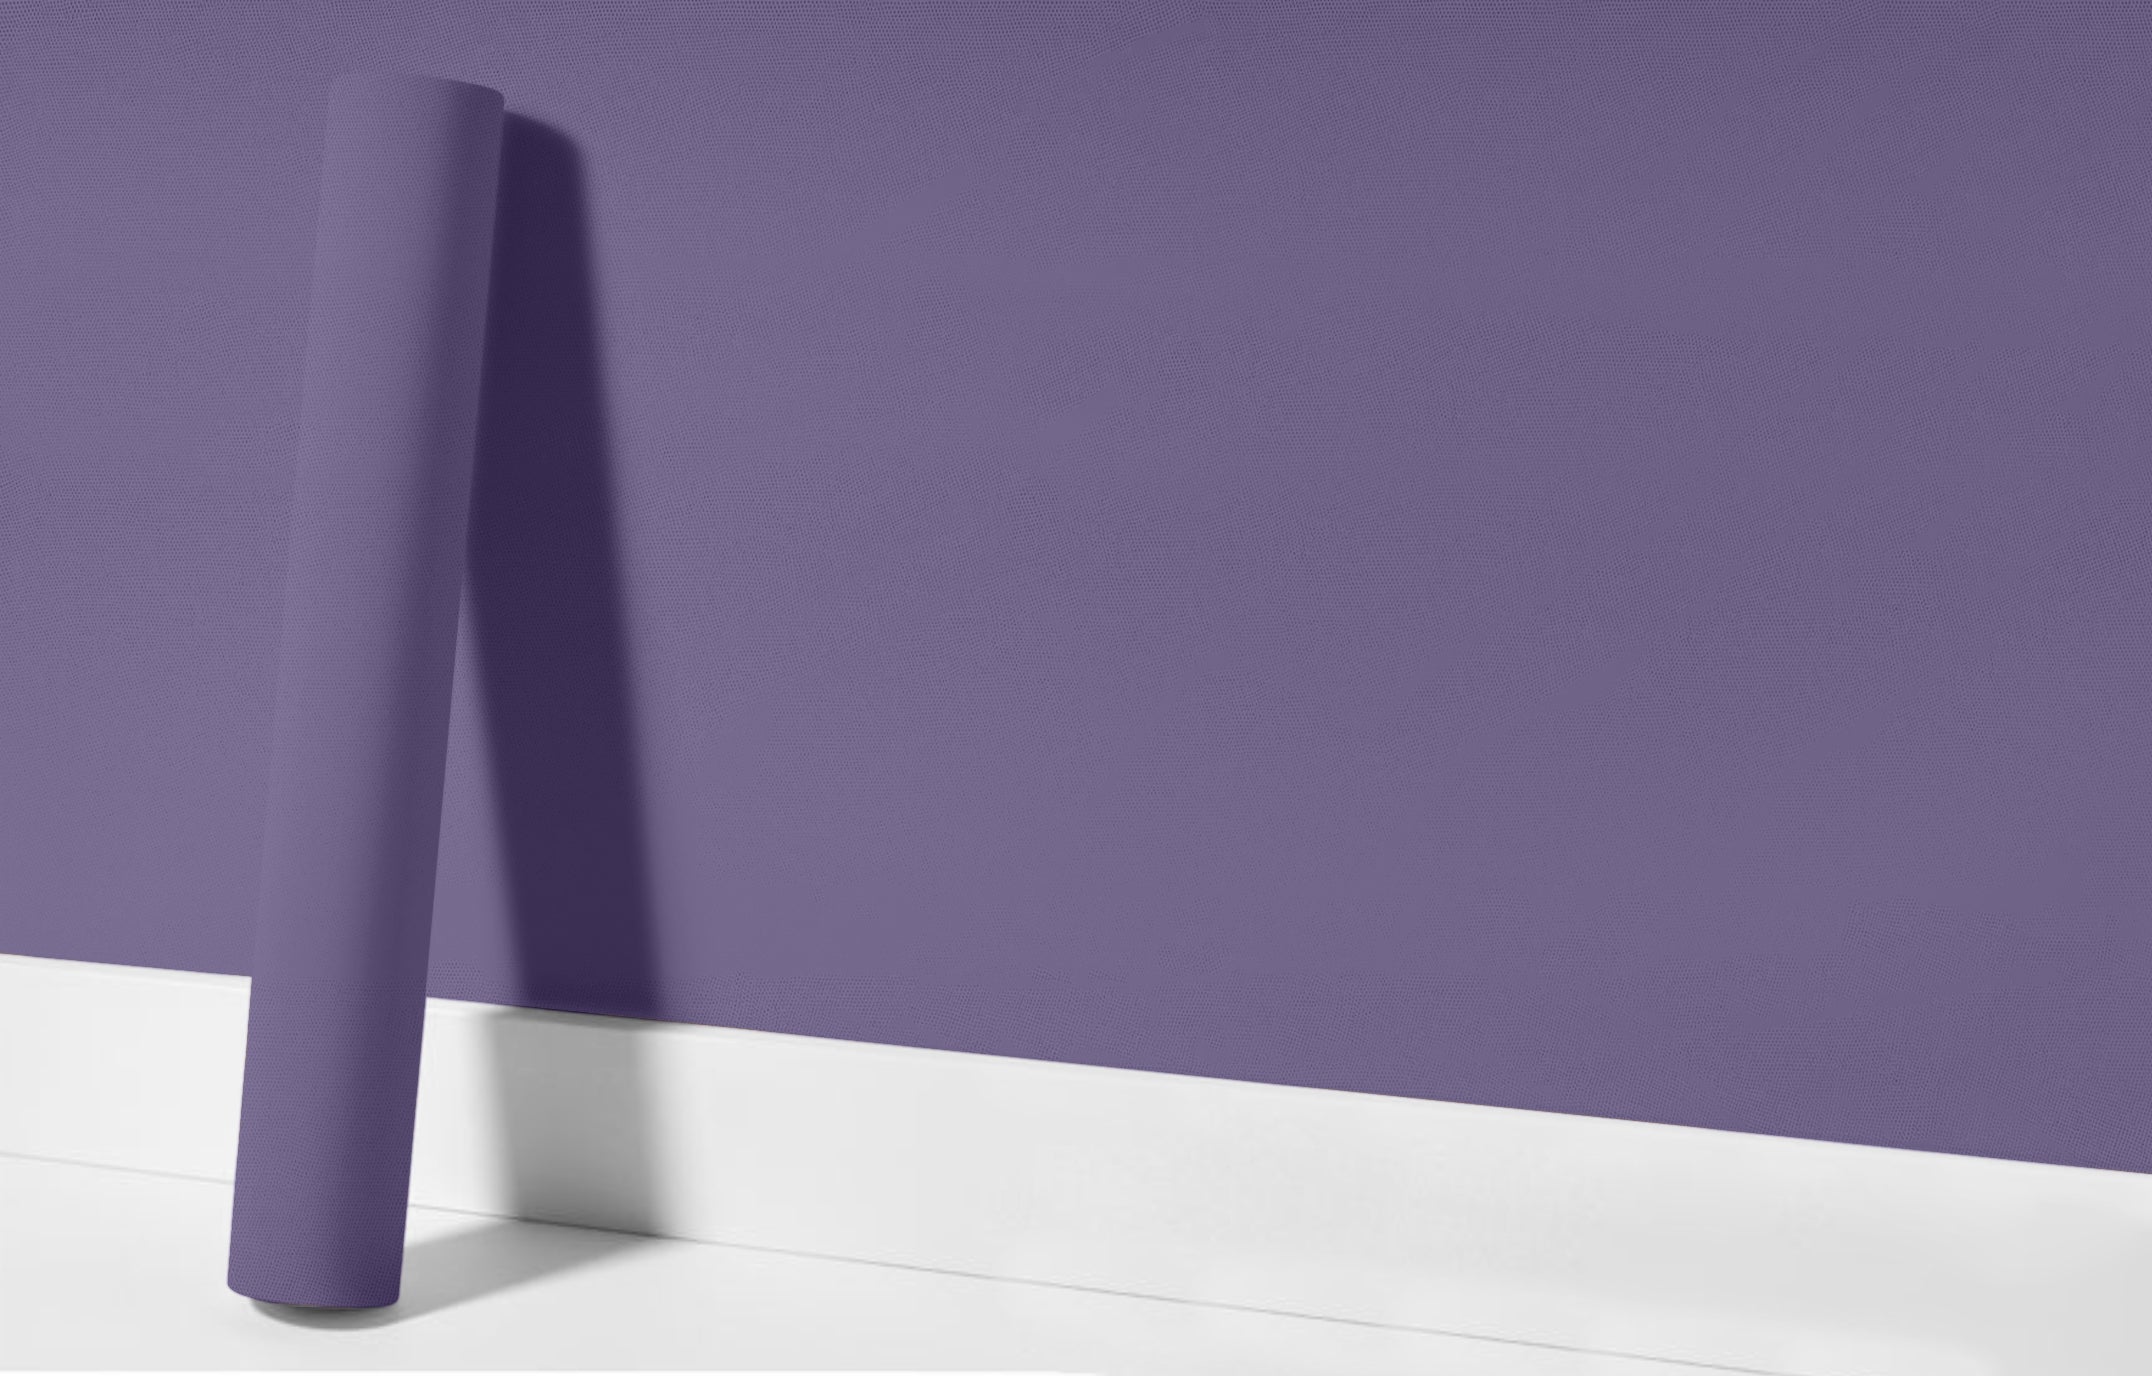 Peel & Stick Removable Re-usable Paint - Color RAL 4011 Pearl Violet - offRAL™ - RALRAW LLC, USA